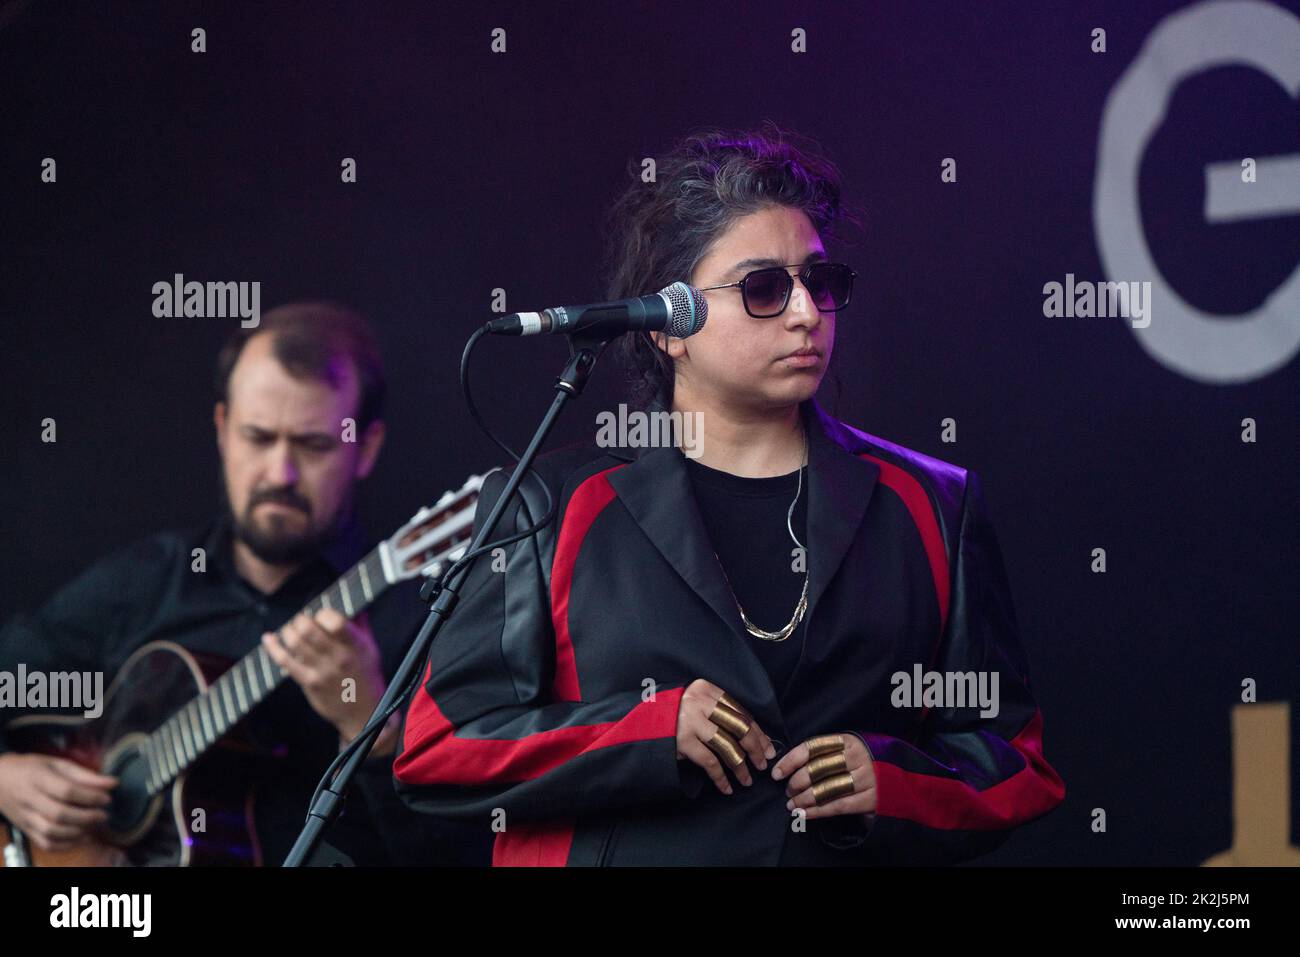 Grammy winner Arooj Aftab plays the Walled Garden Stage at the Green Man 2022 music festival in Wales, UK. Photo: Rob Watkins/Alamy Stock Photo